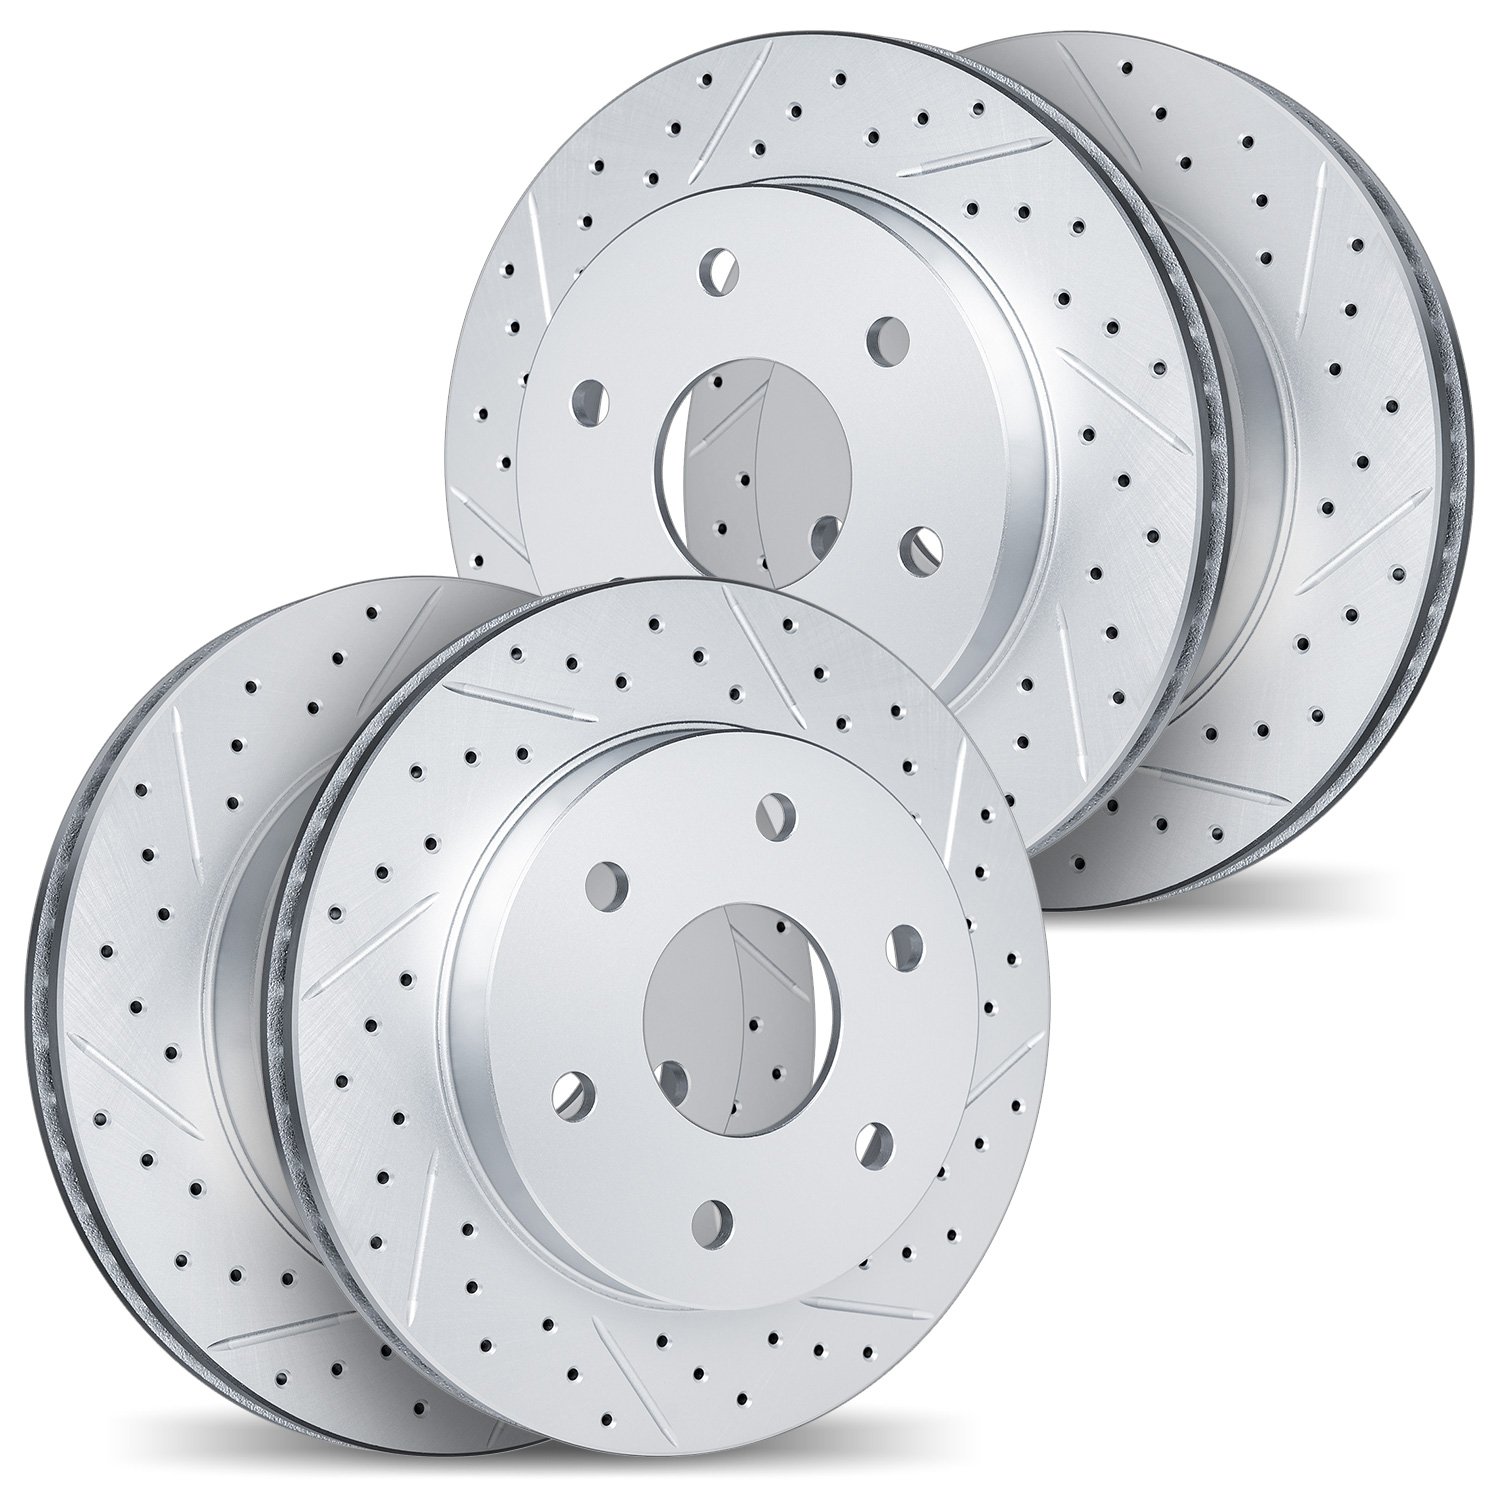 2004-48004 Geoperformance Drilled/Slotted Brake Rotors, 2006-2009 GM, Position: Front and Rear